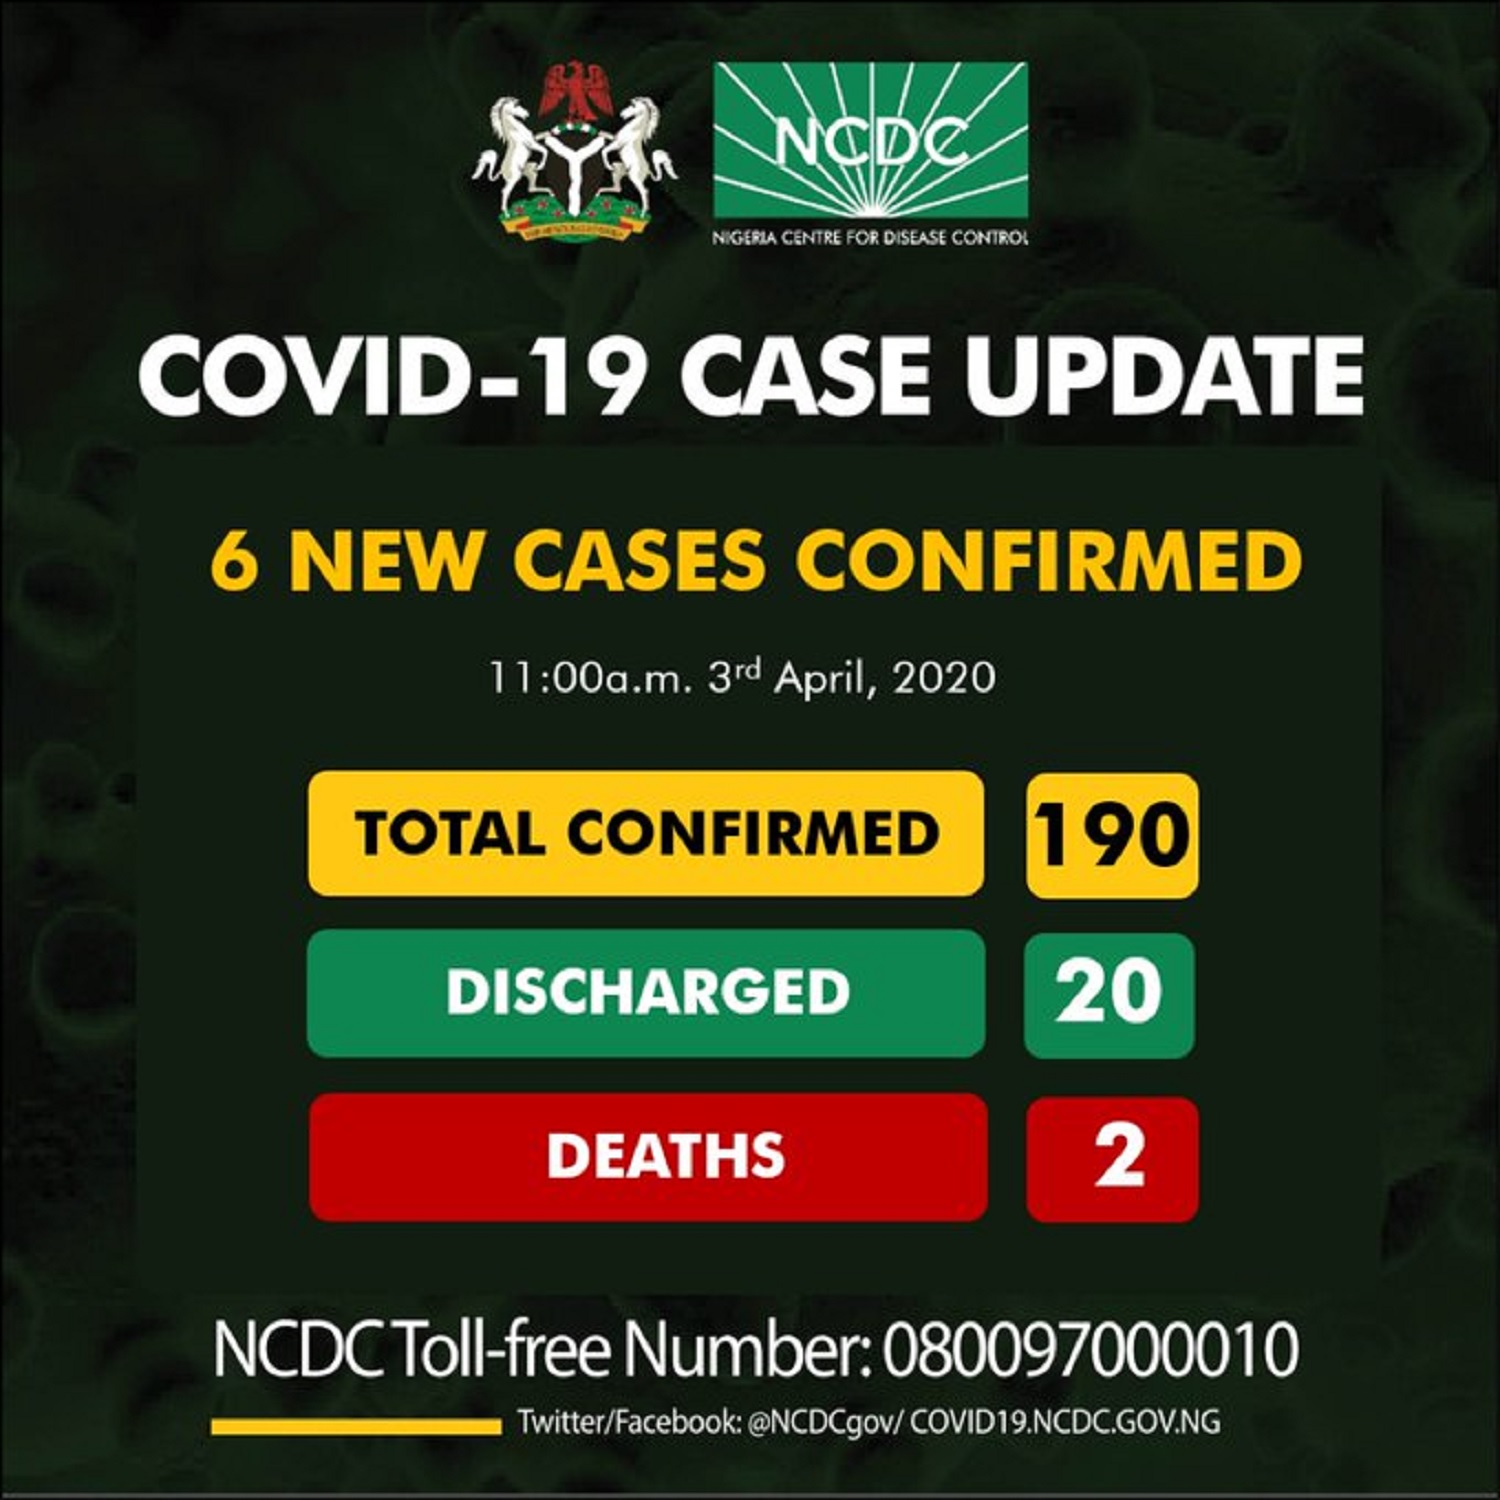 BREAKING: NCDC updates COVID-19 cases in Nigeria to 190